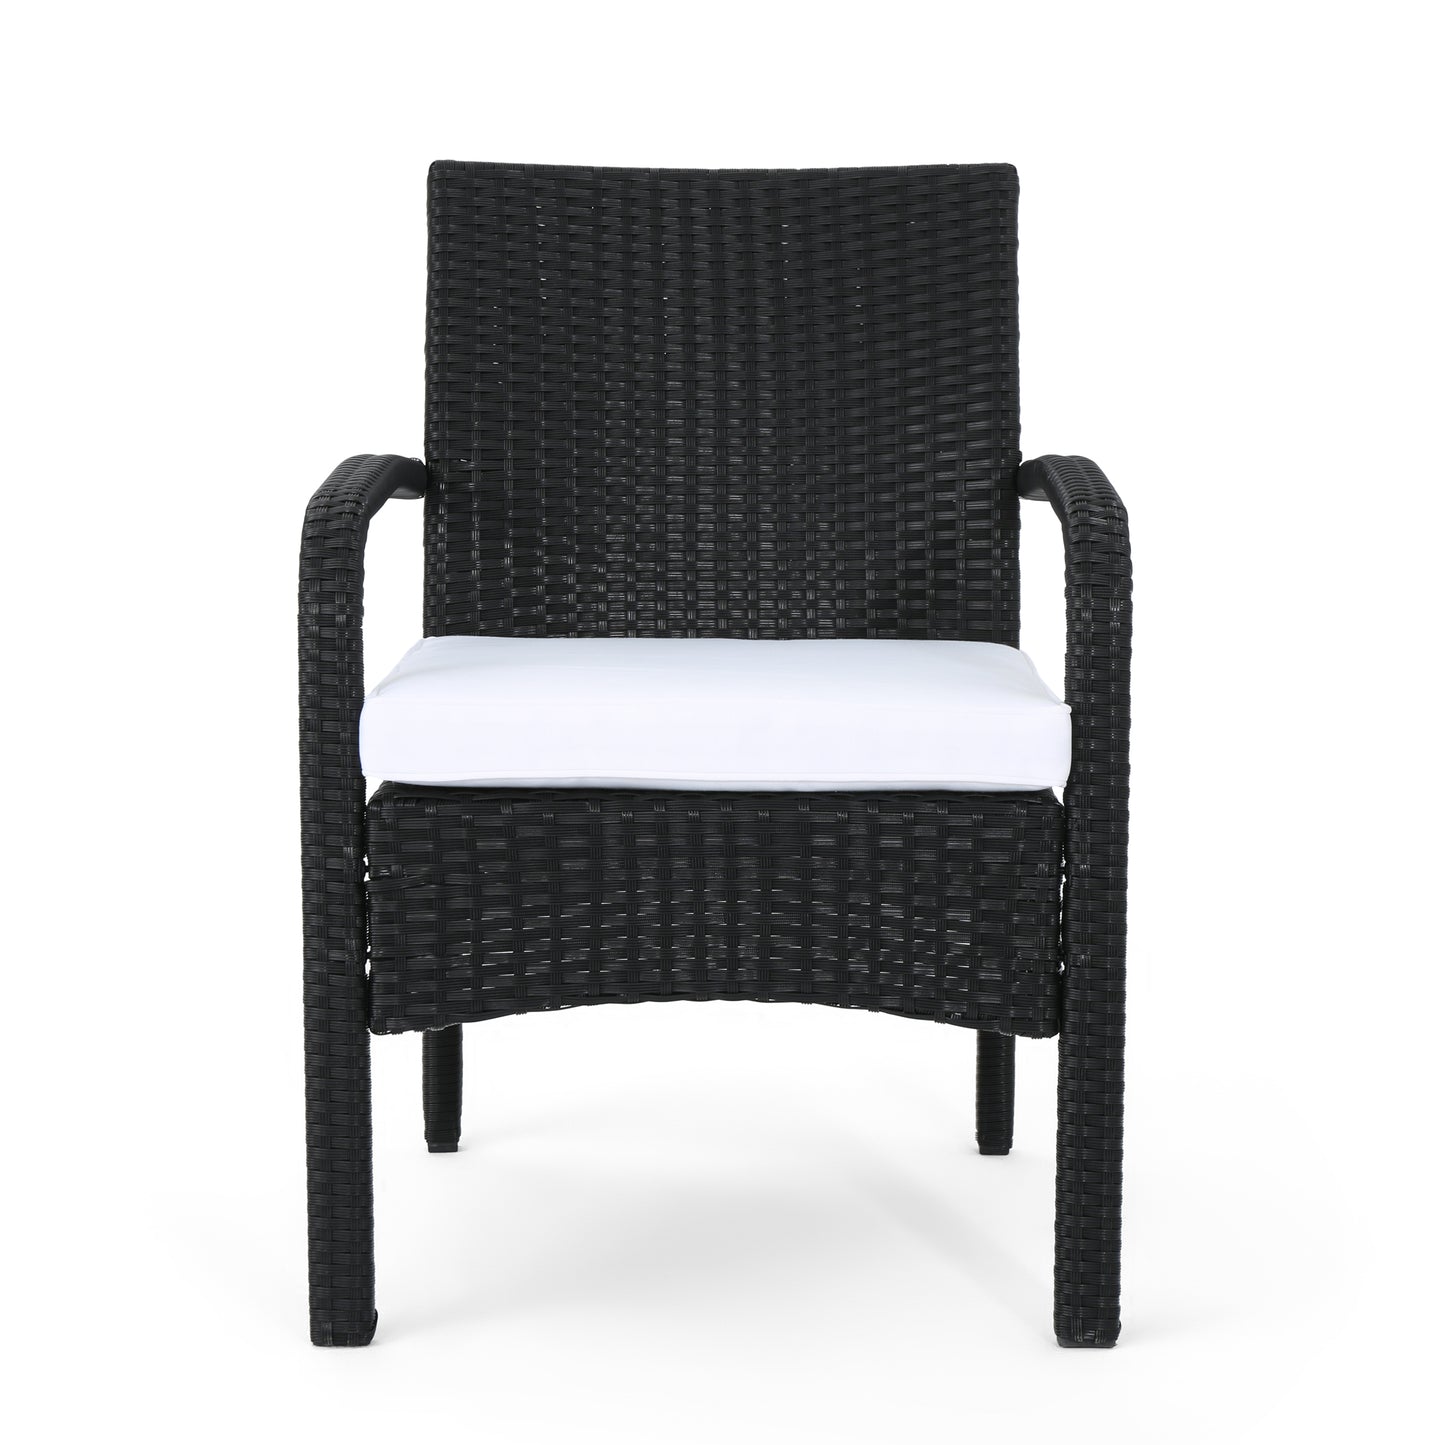 Carmela Outdoor 4 Piece Black Wicker Chat Set with White Water Resistant Cushions